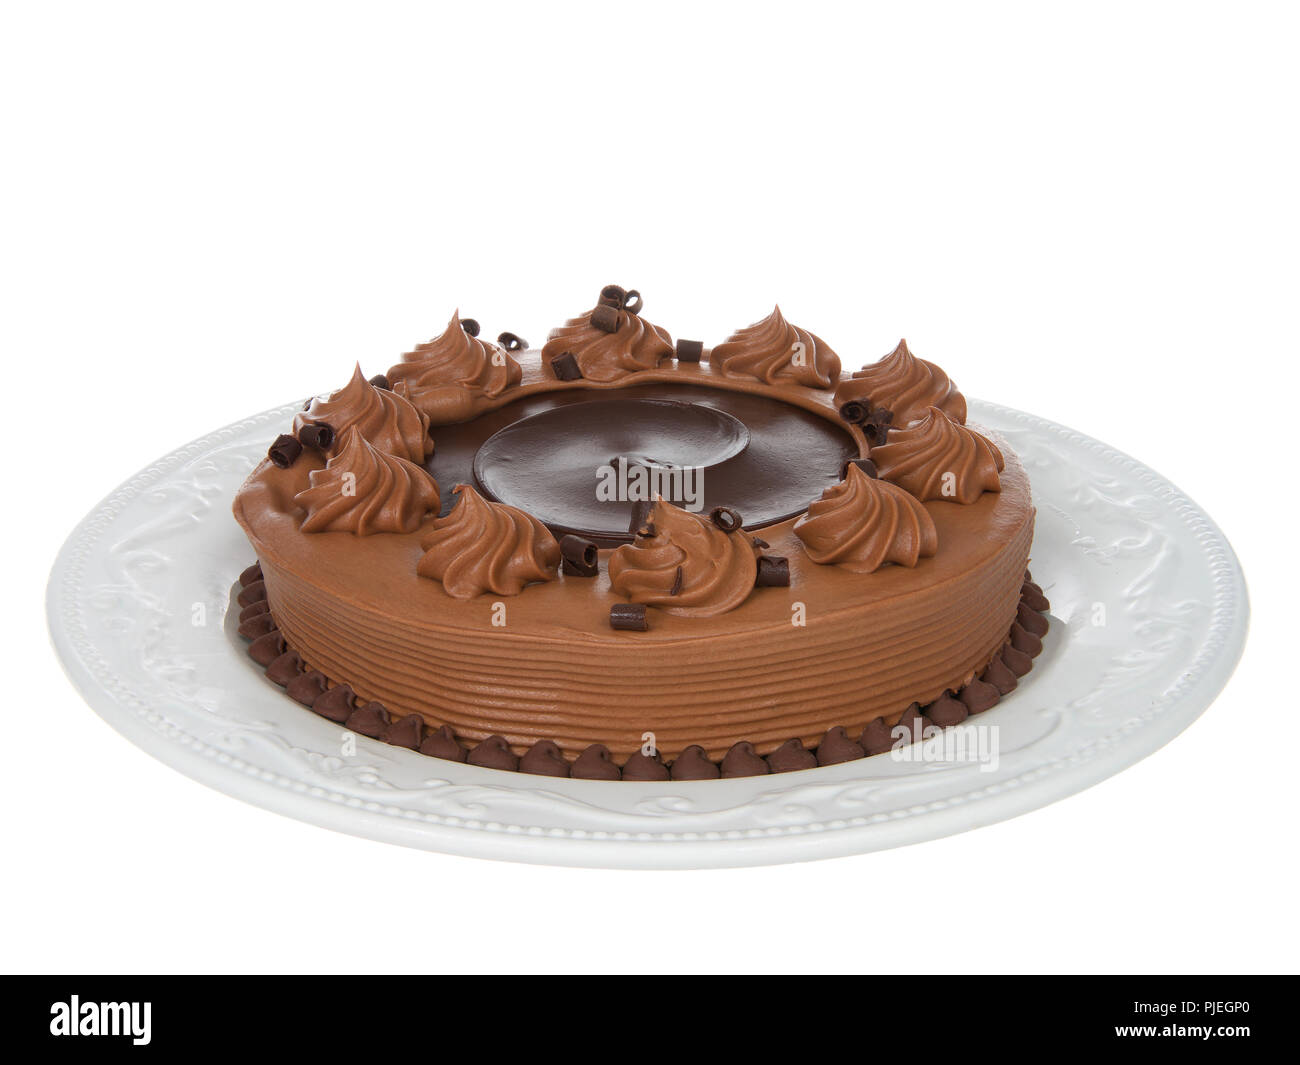 Home made chocolate cake with chocolate fudge on top on an off white porcelain plate isolated on white background. Stock Photo